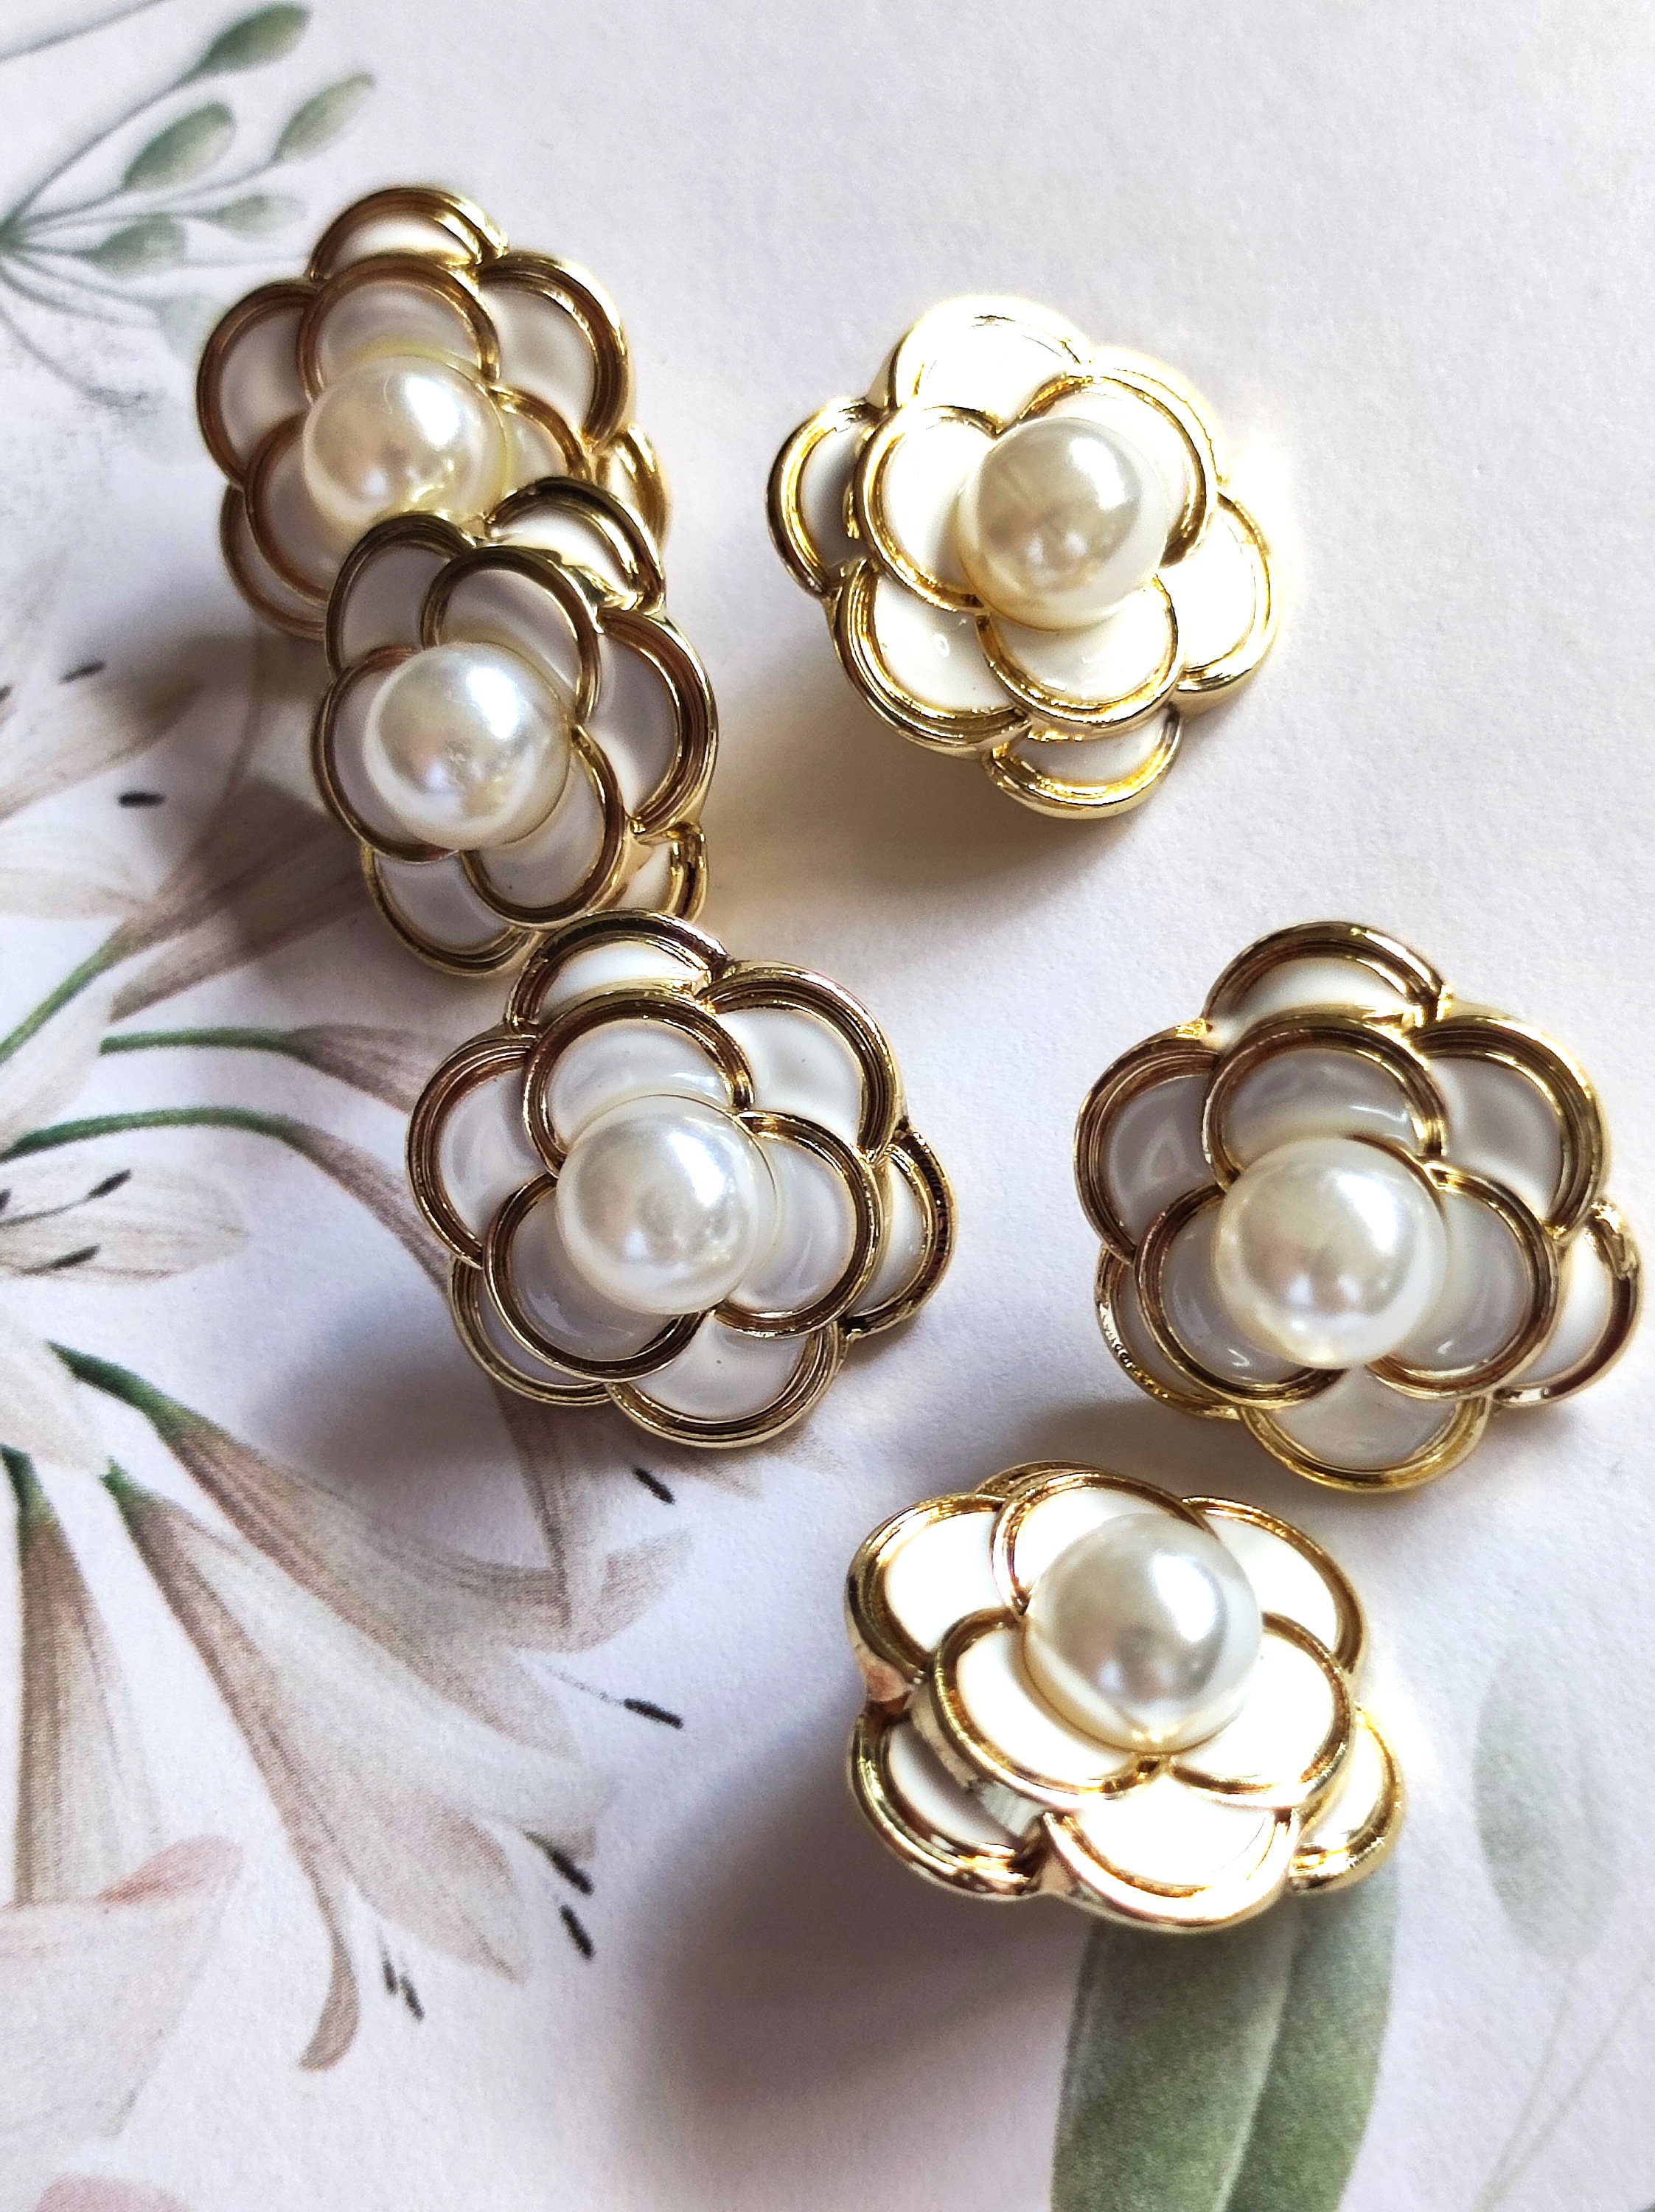 Authentic Chanel Buttons -  Sweden